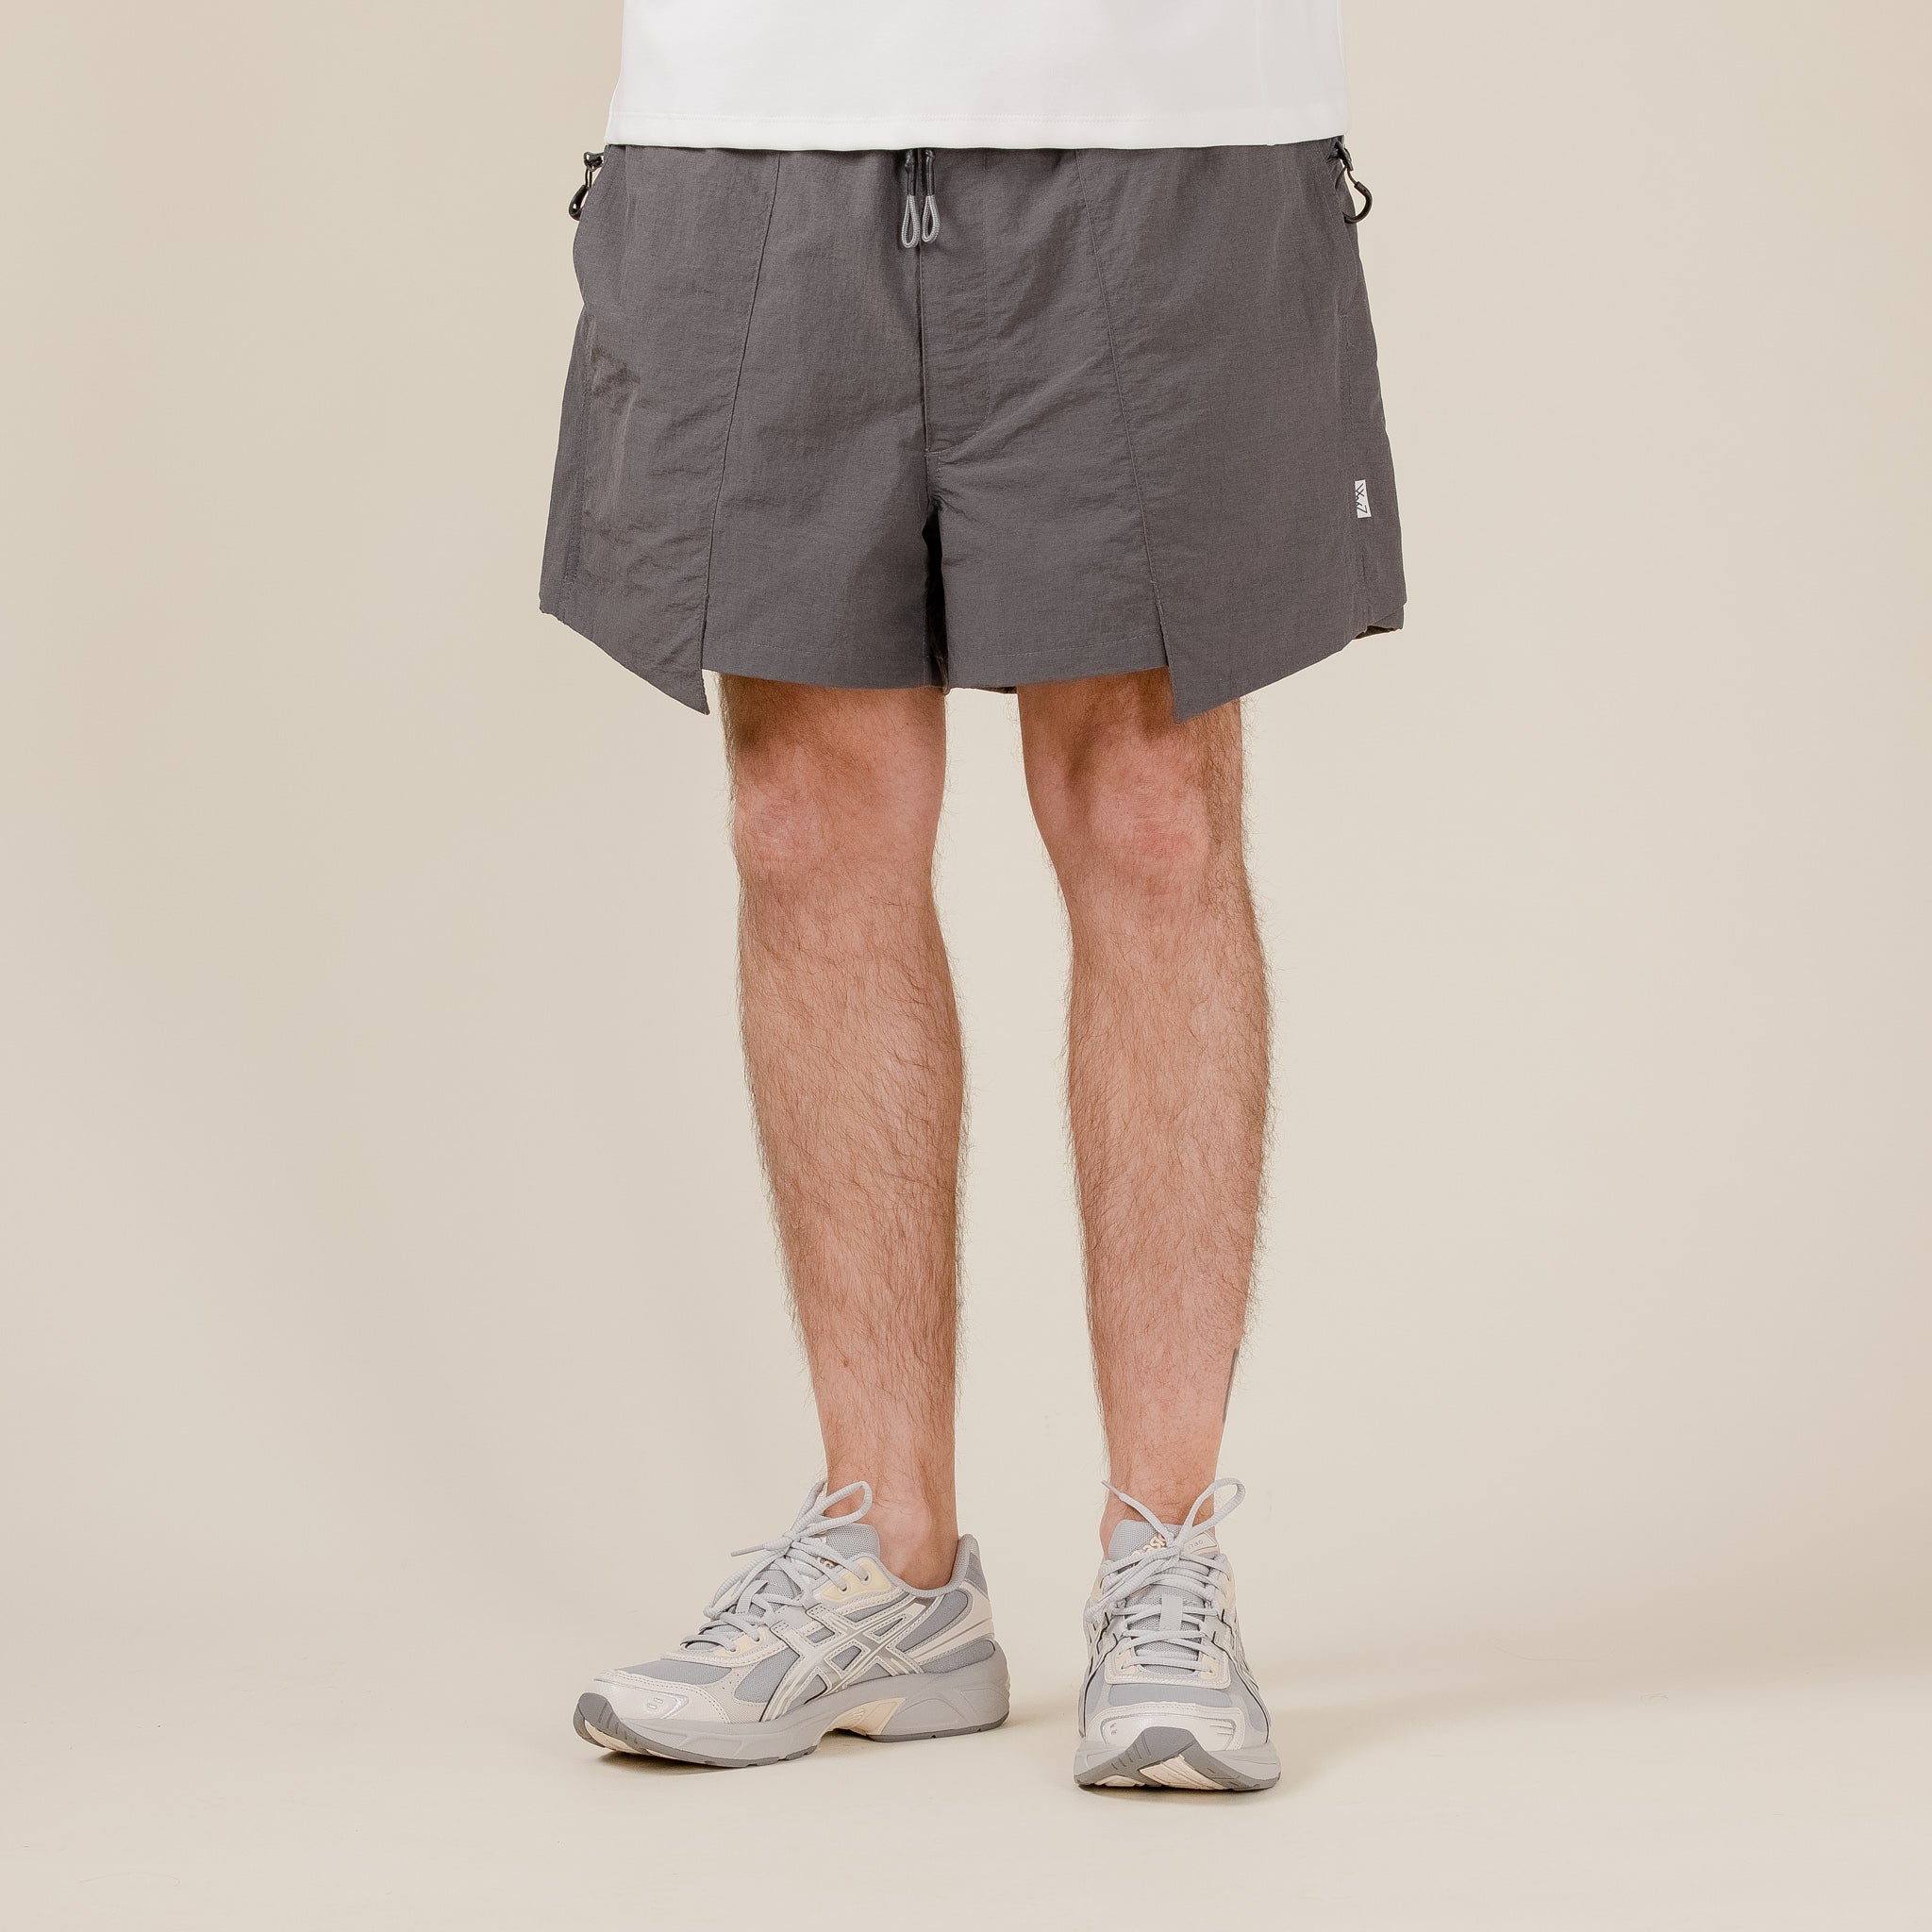 CMF Outdoor Garment - 2023 Bug Shorts - Charcoal "lost hills store Japan" "comfy outdoor garment stockists" "cmf outdoor garment stockists"